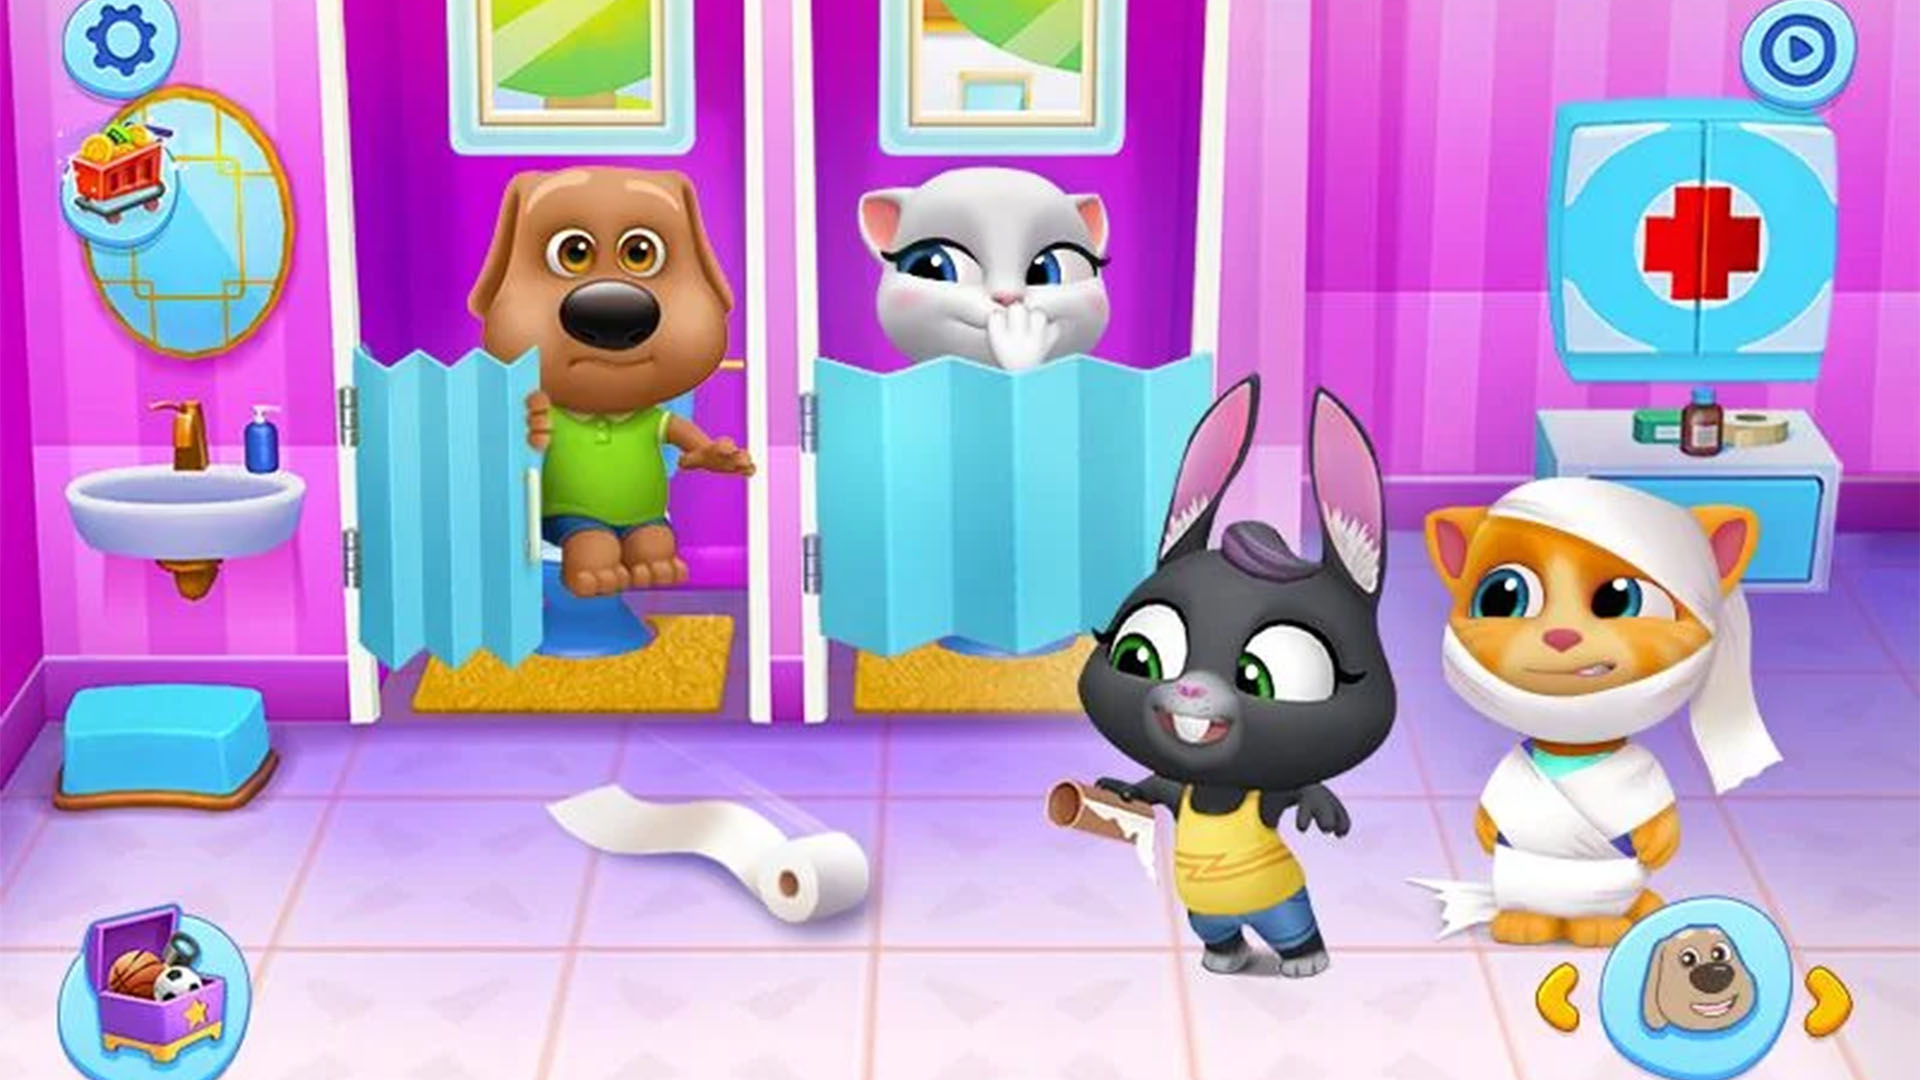 The best virtual pet apps and games for Android - Android Authority